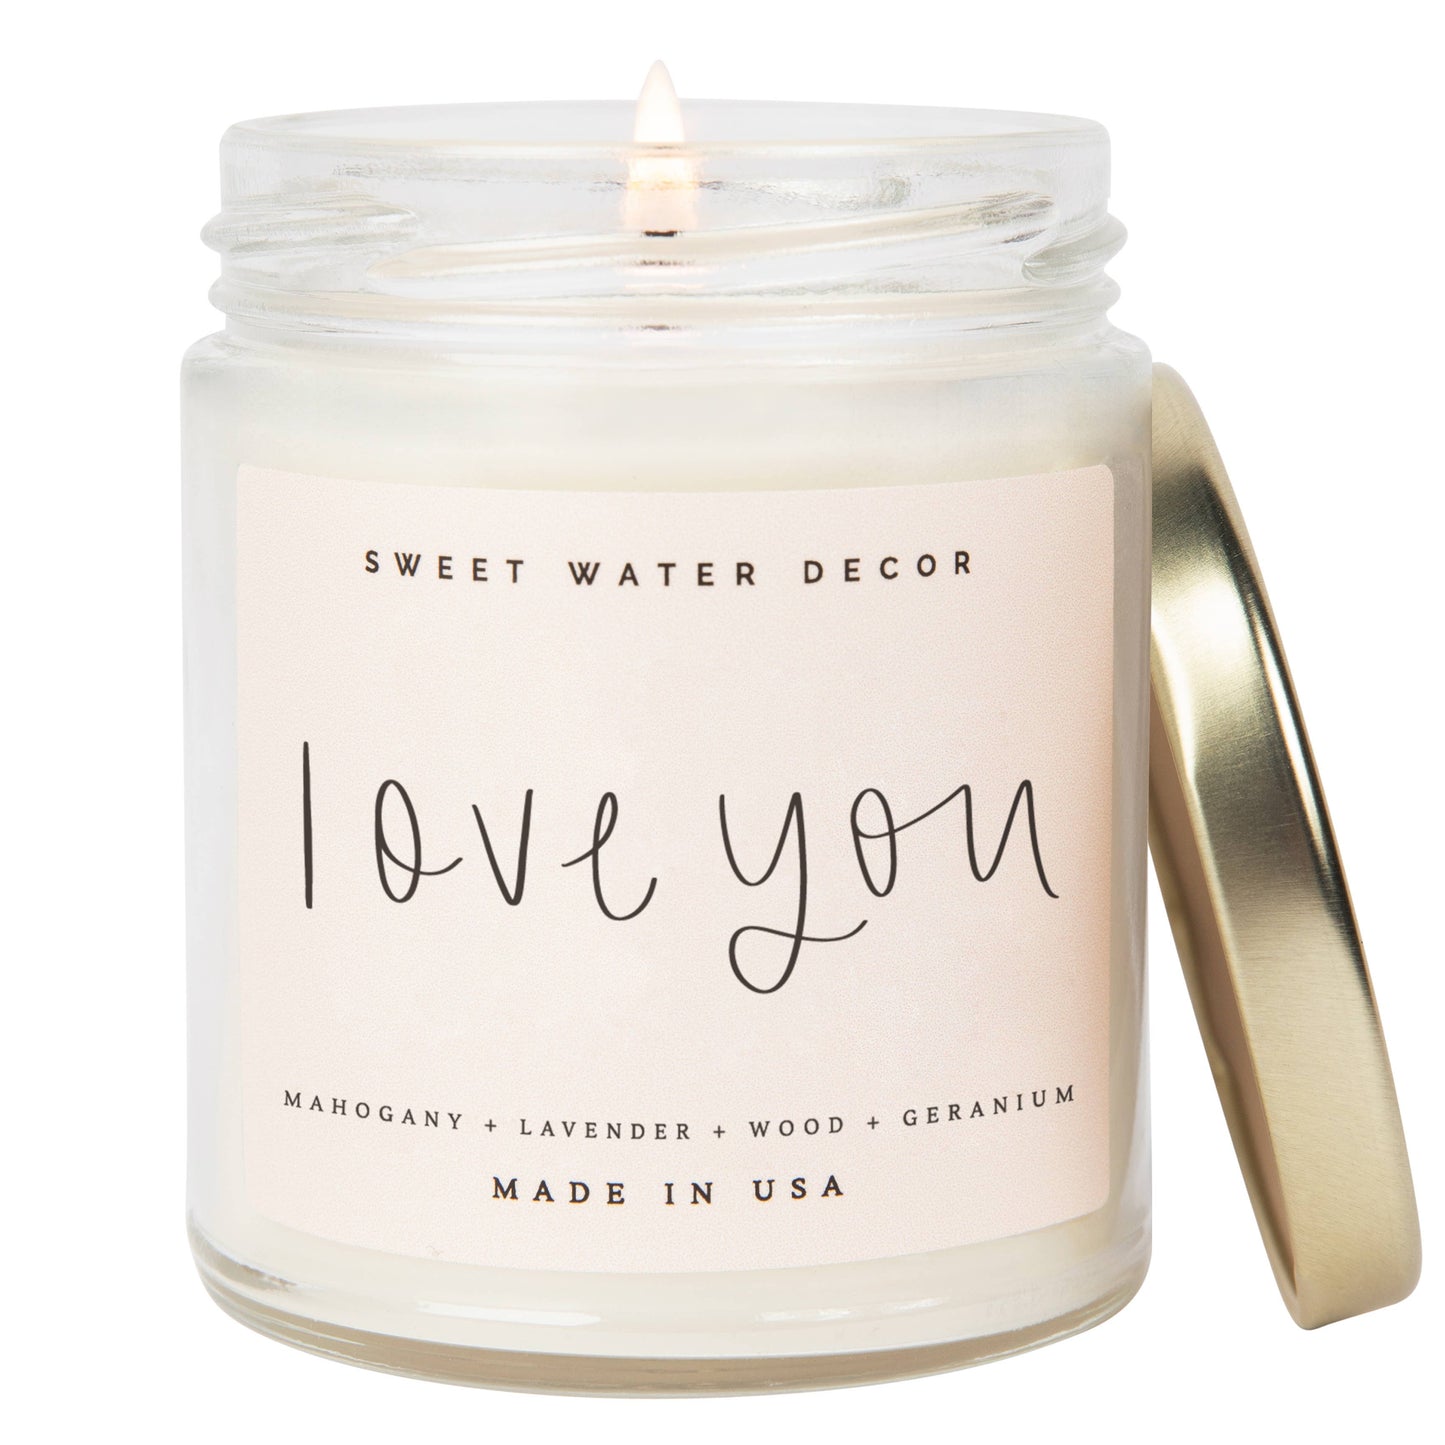 Love You 9 oz Soy Candle - Home Decor & Gifts